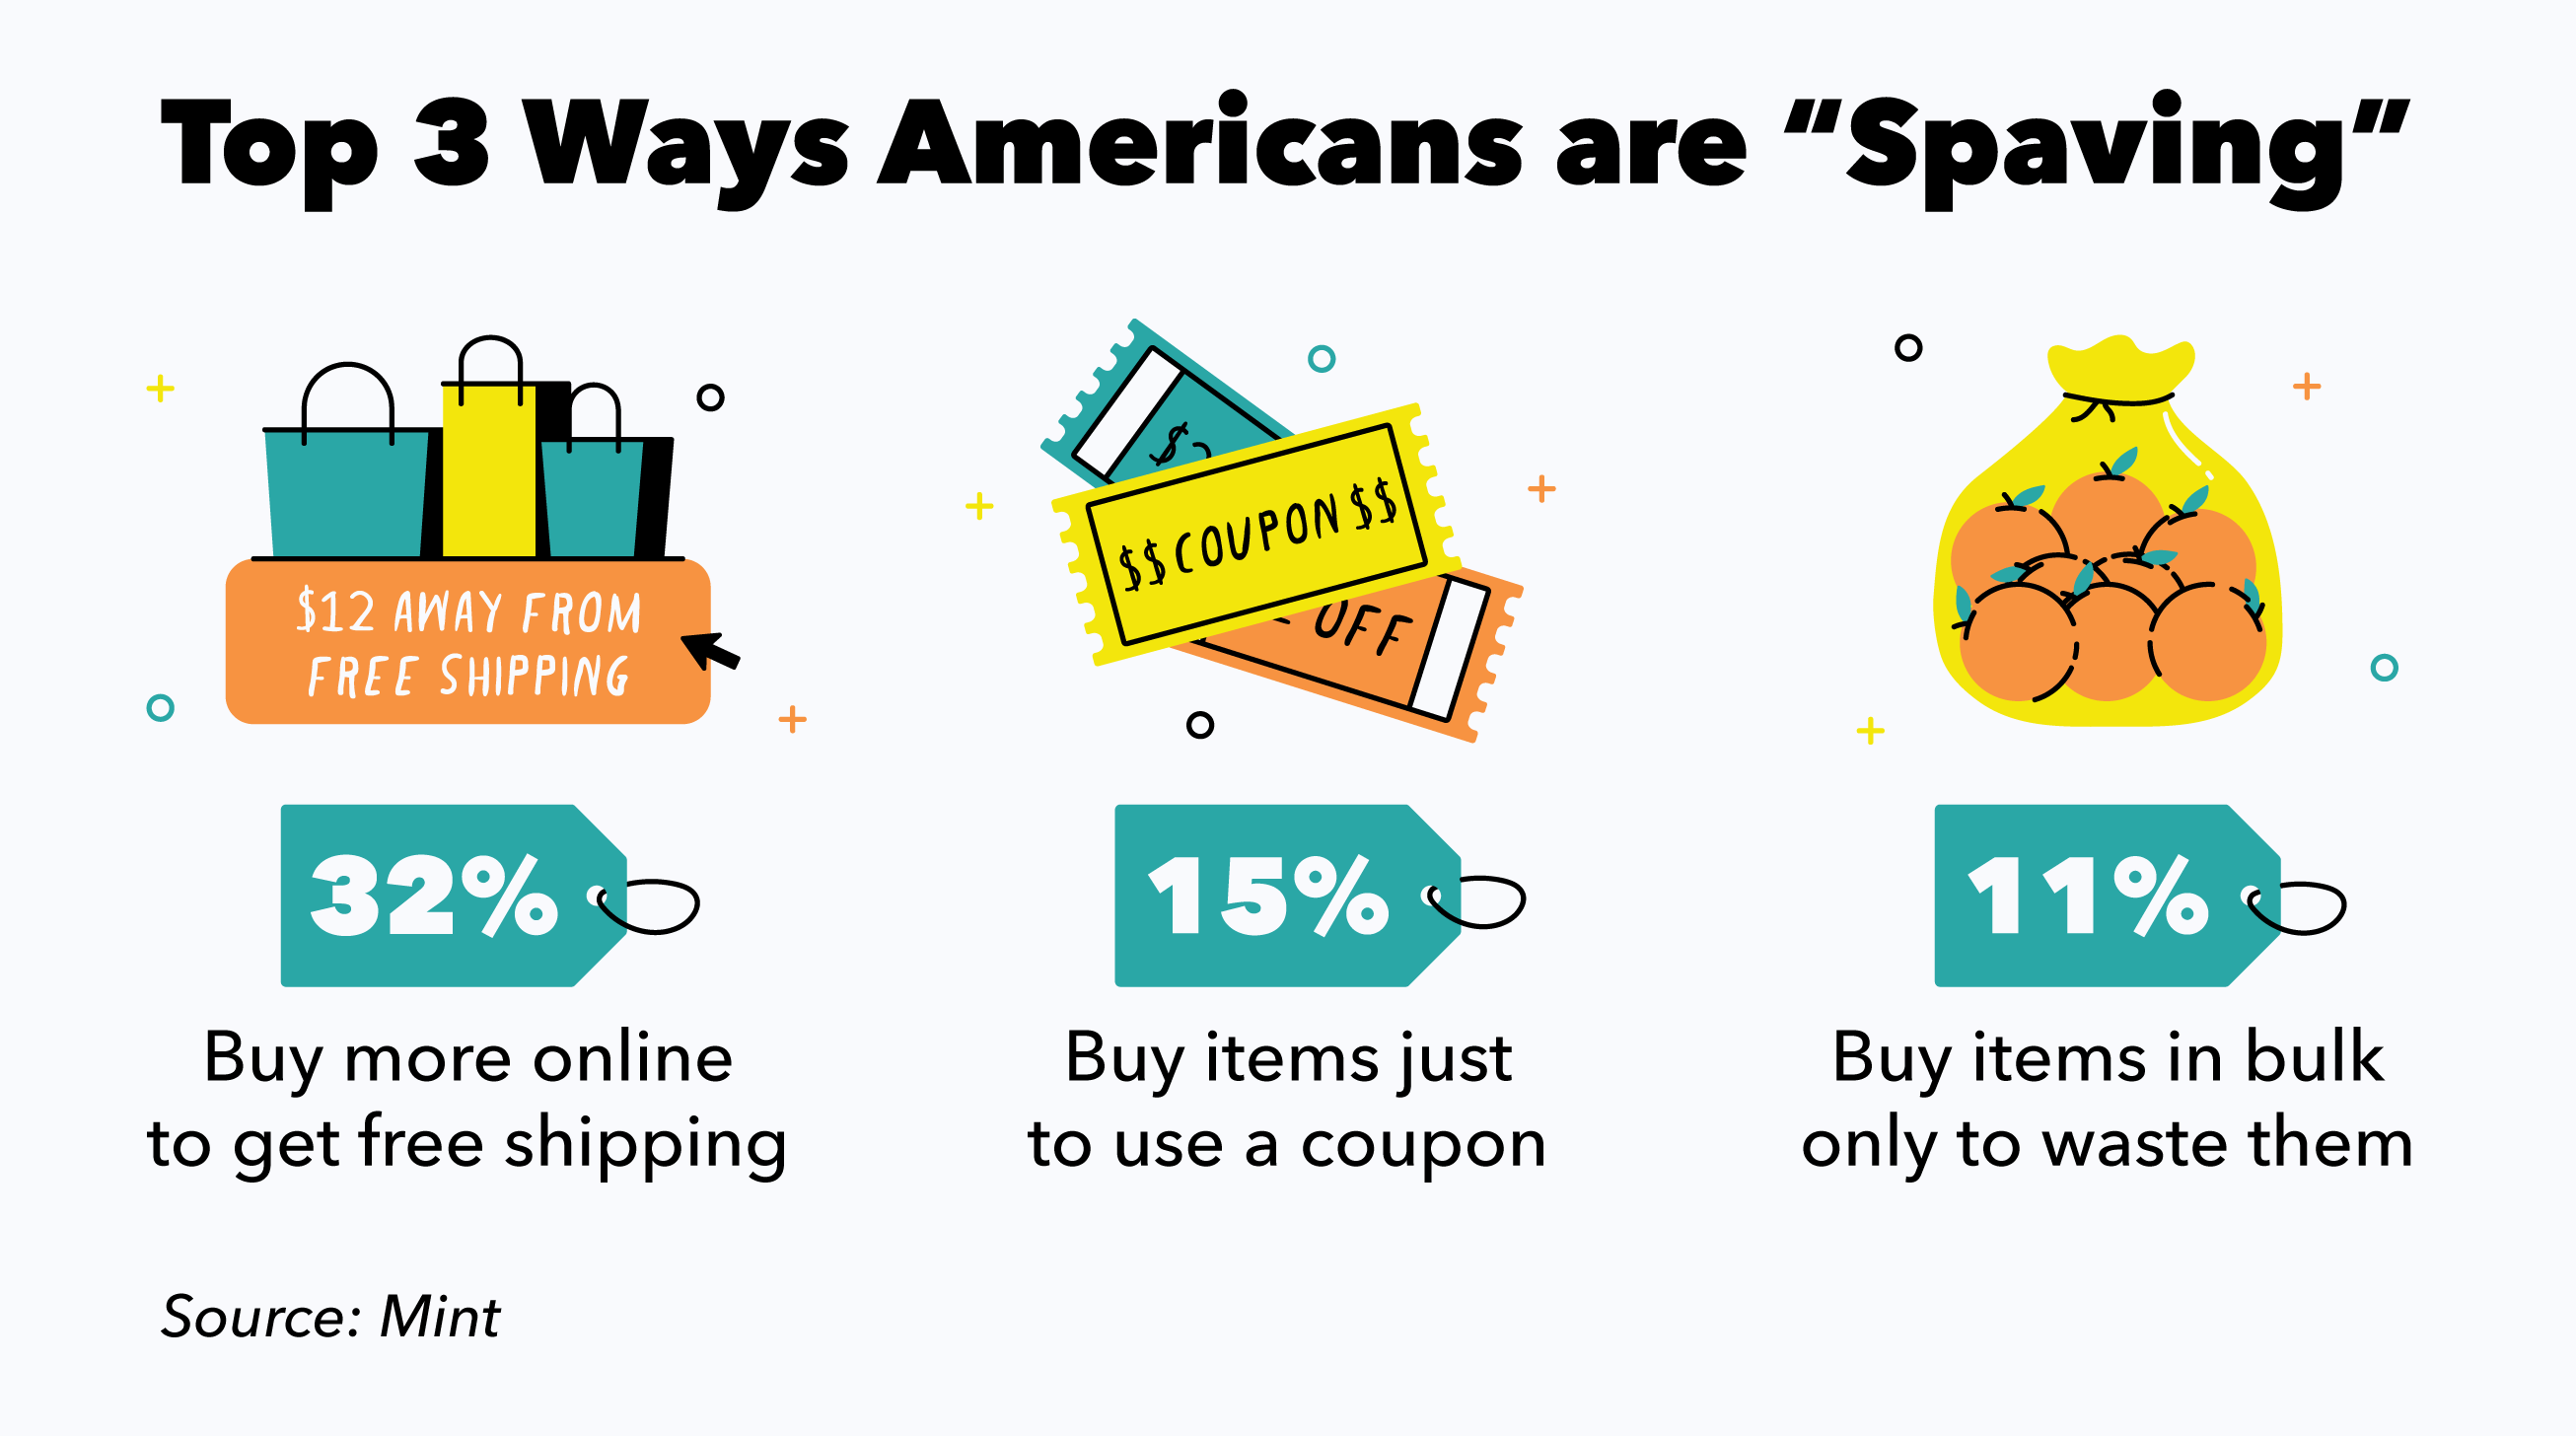 The 3 Ways Americans are Spaving